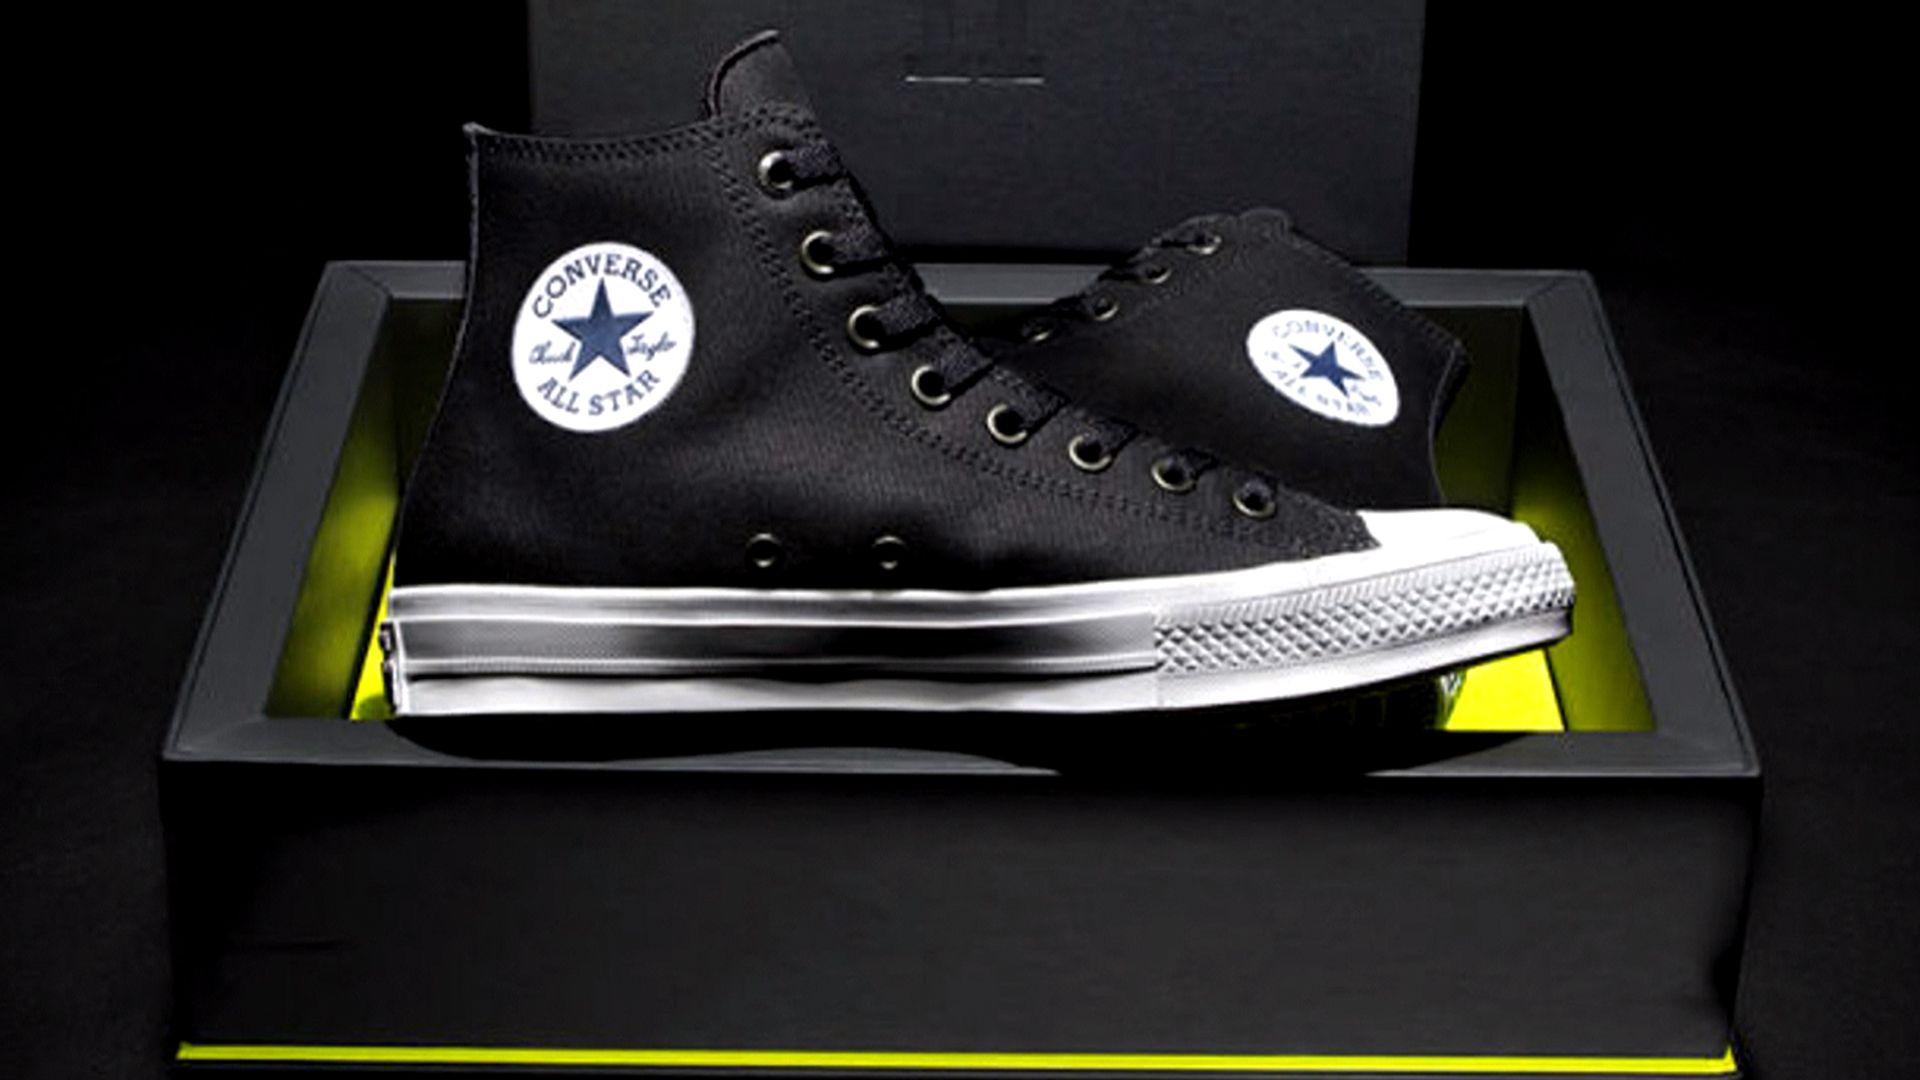 Converse's Chuck Taylor sneaker getting an update from Nike